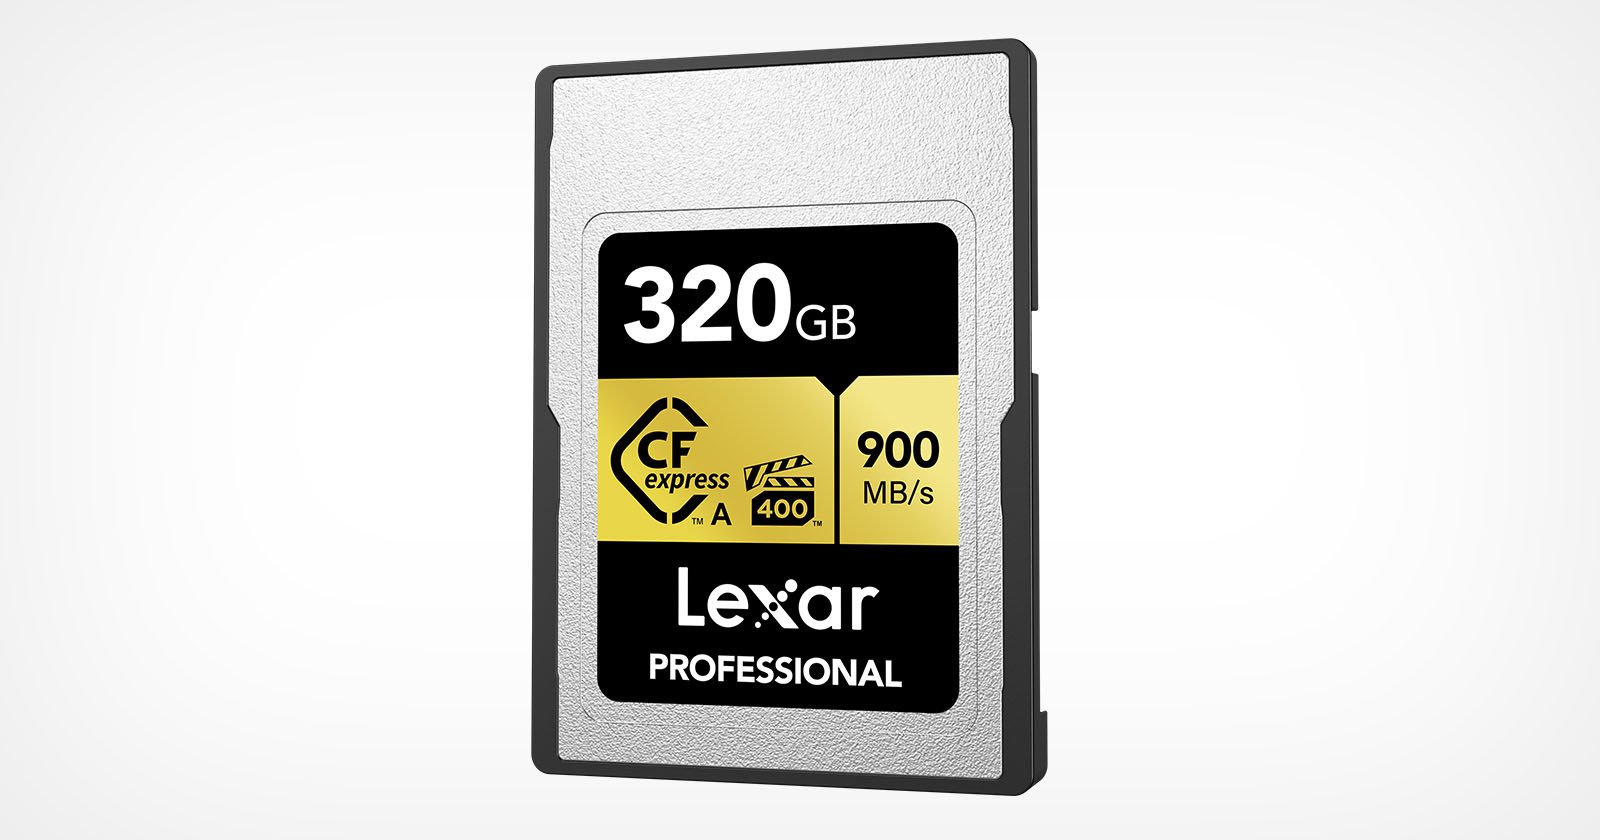 Lexar Introduces Higher Capacity 320GB CFexpress Type A Card